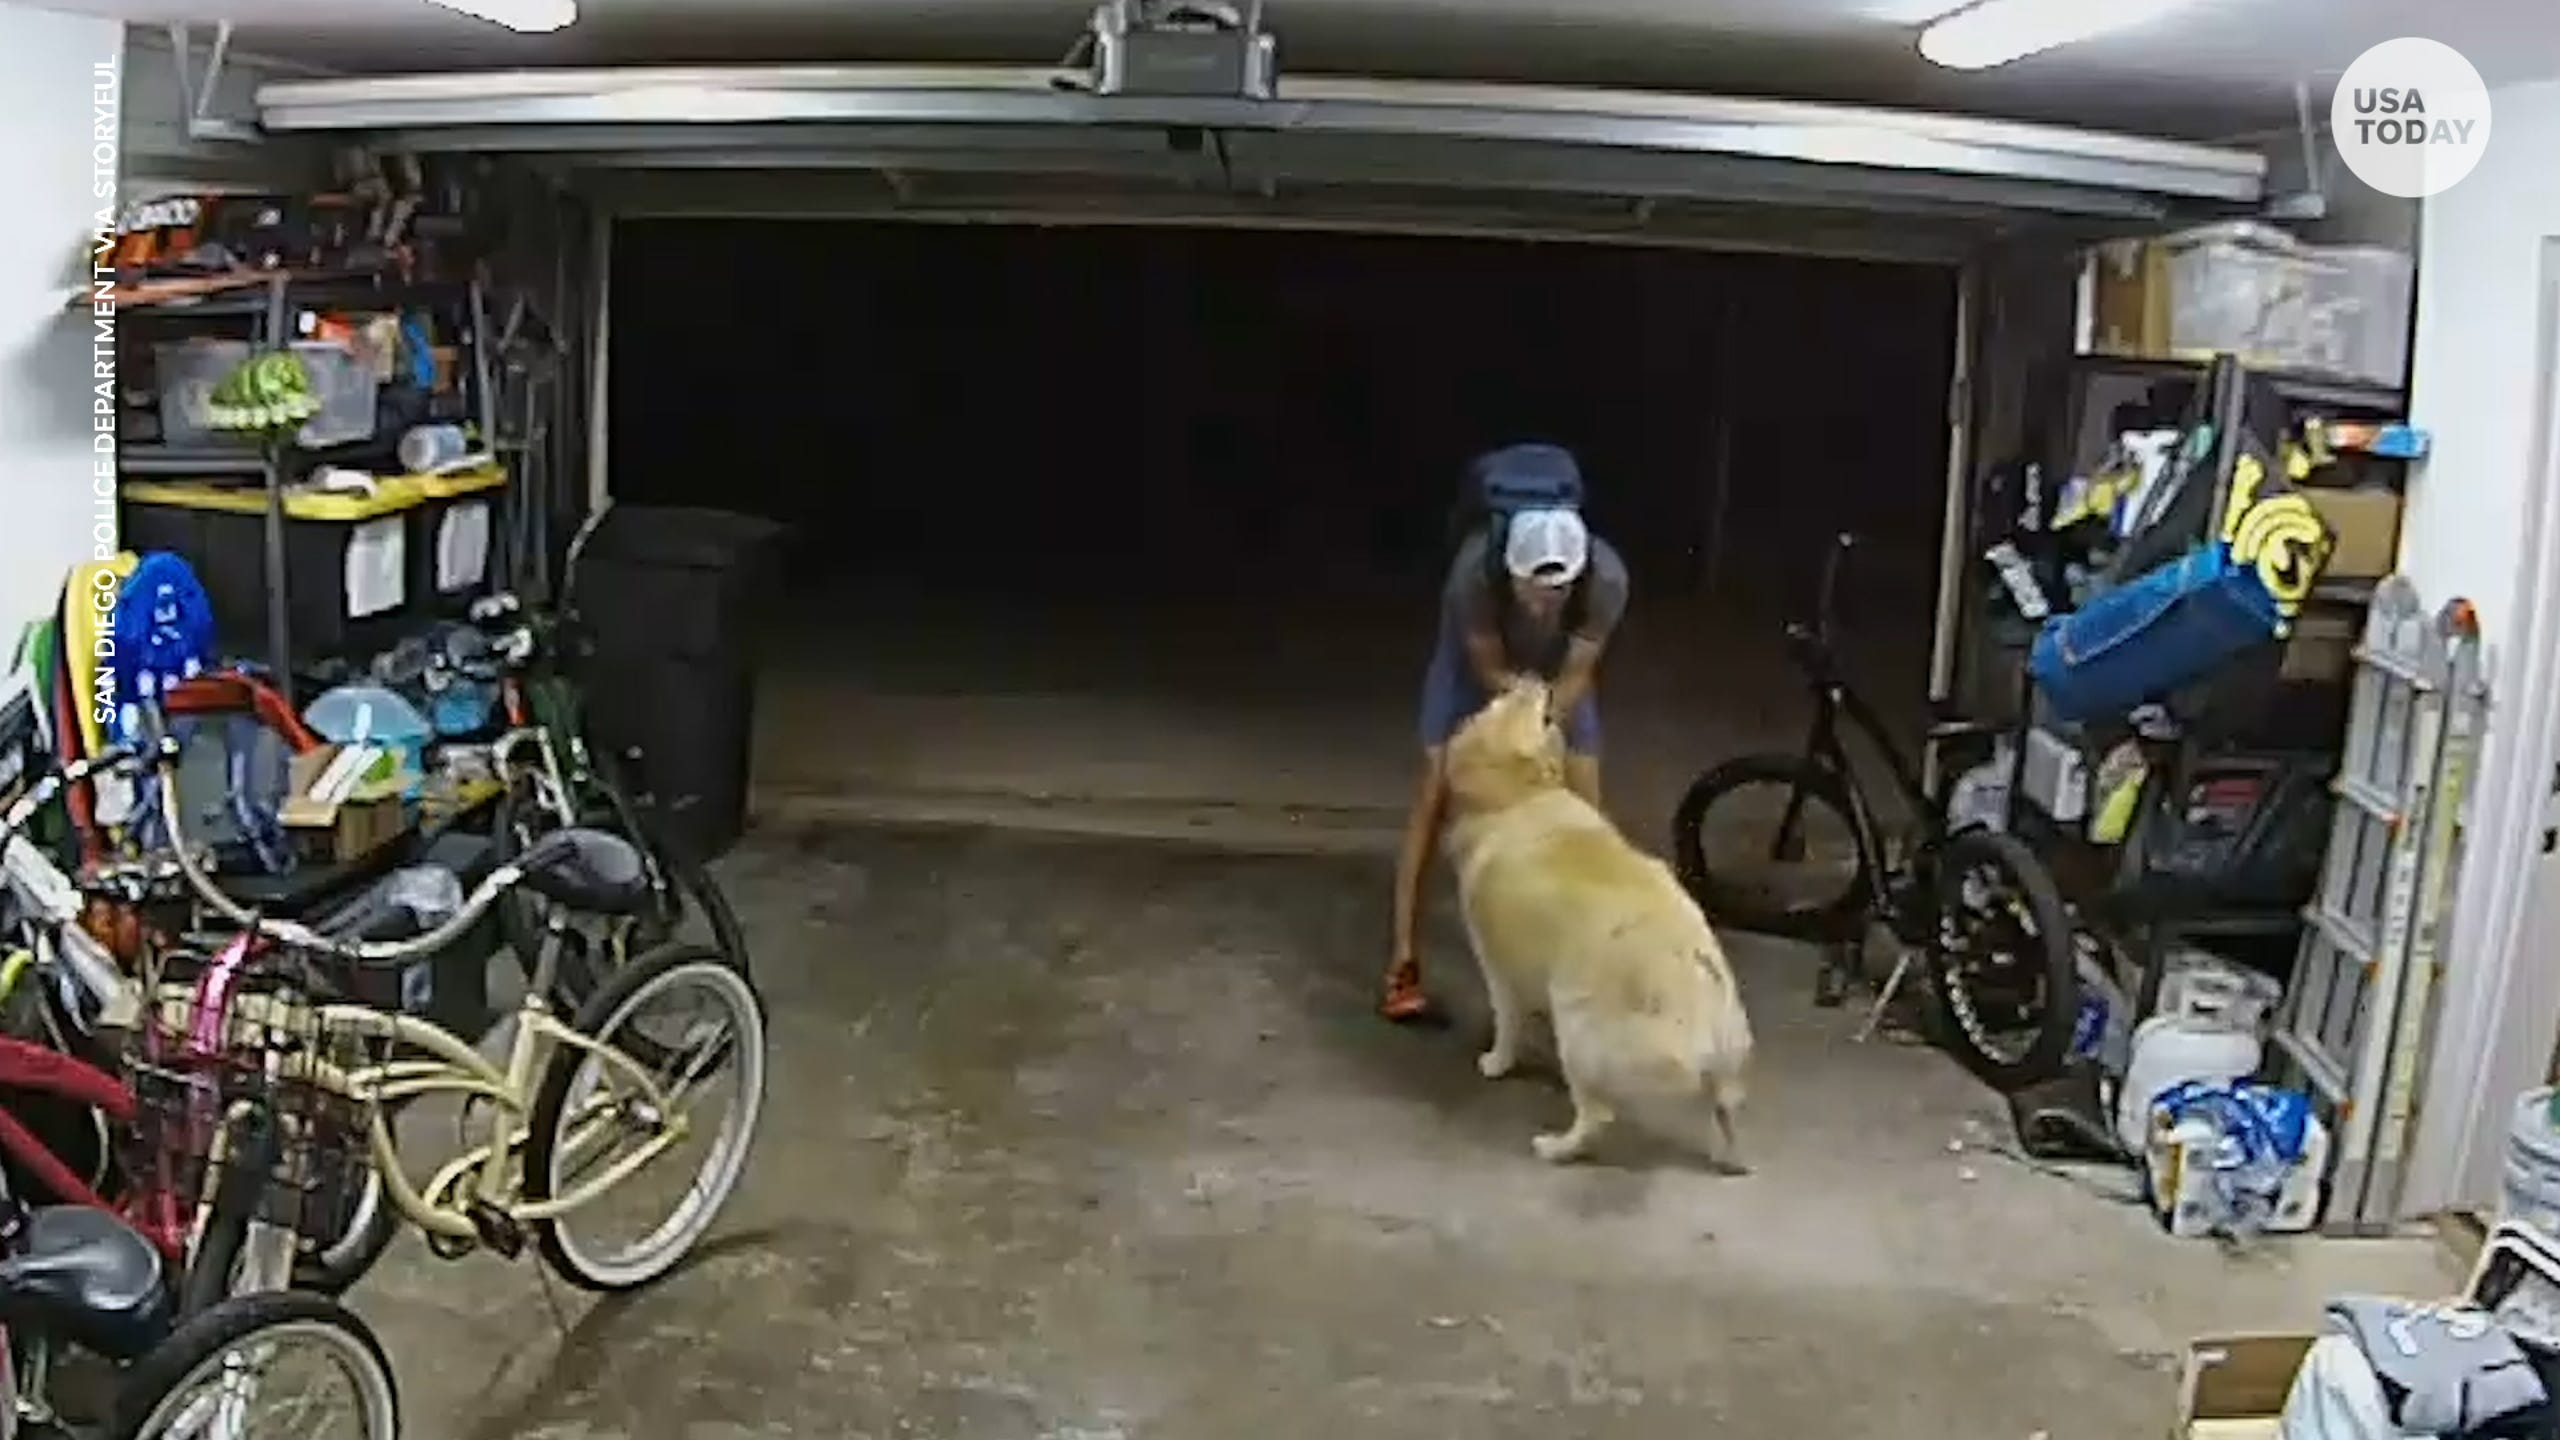 the moment a burglary suspect got distracted while taking a bike from a garage by a very friendly golden retriever dog